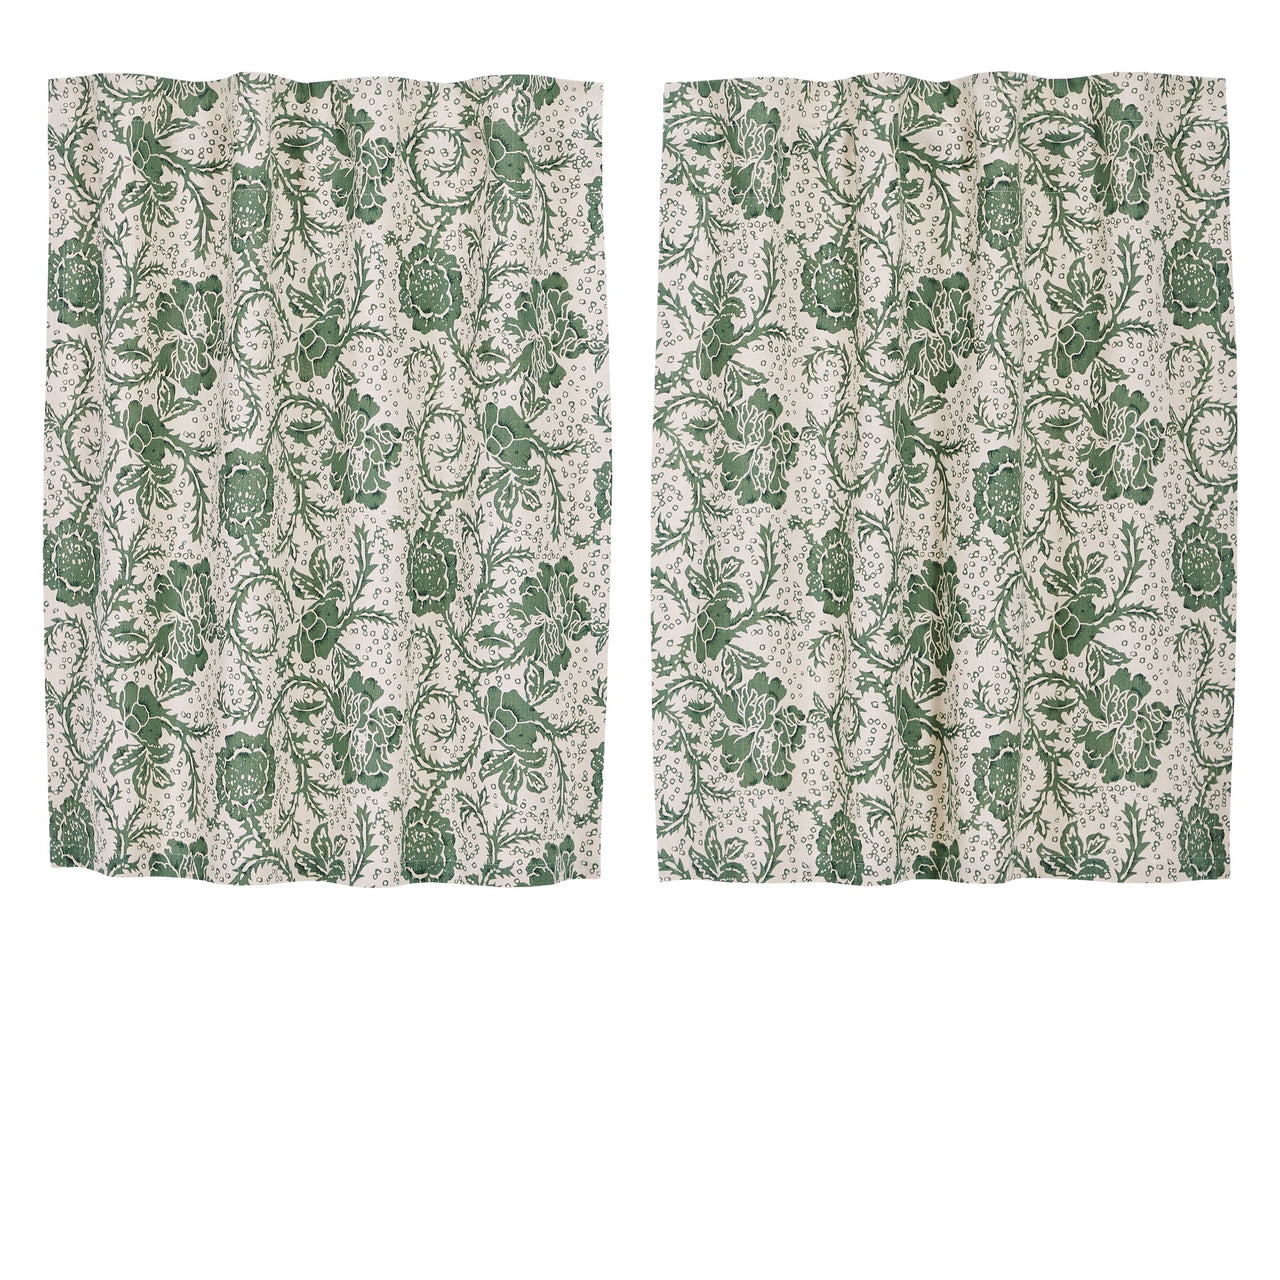 Dorset Green Floral Tier Curtain Set of 2 L24xW36 VHC Brands